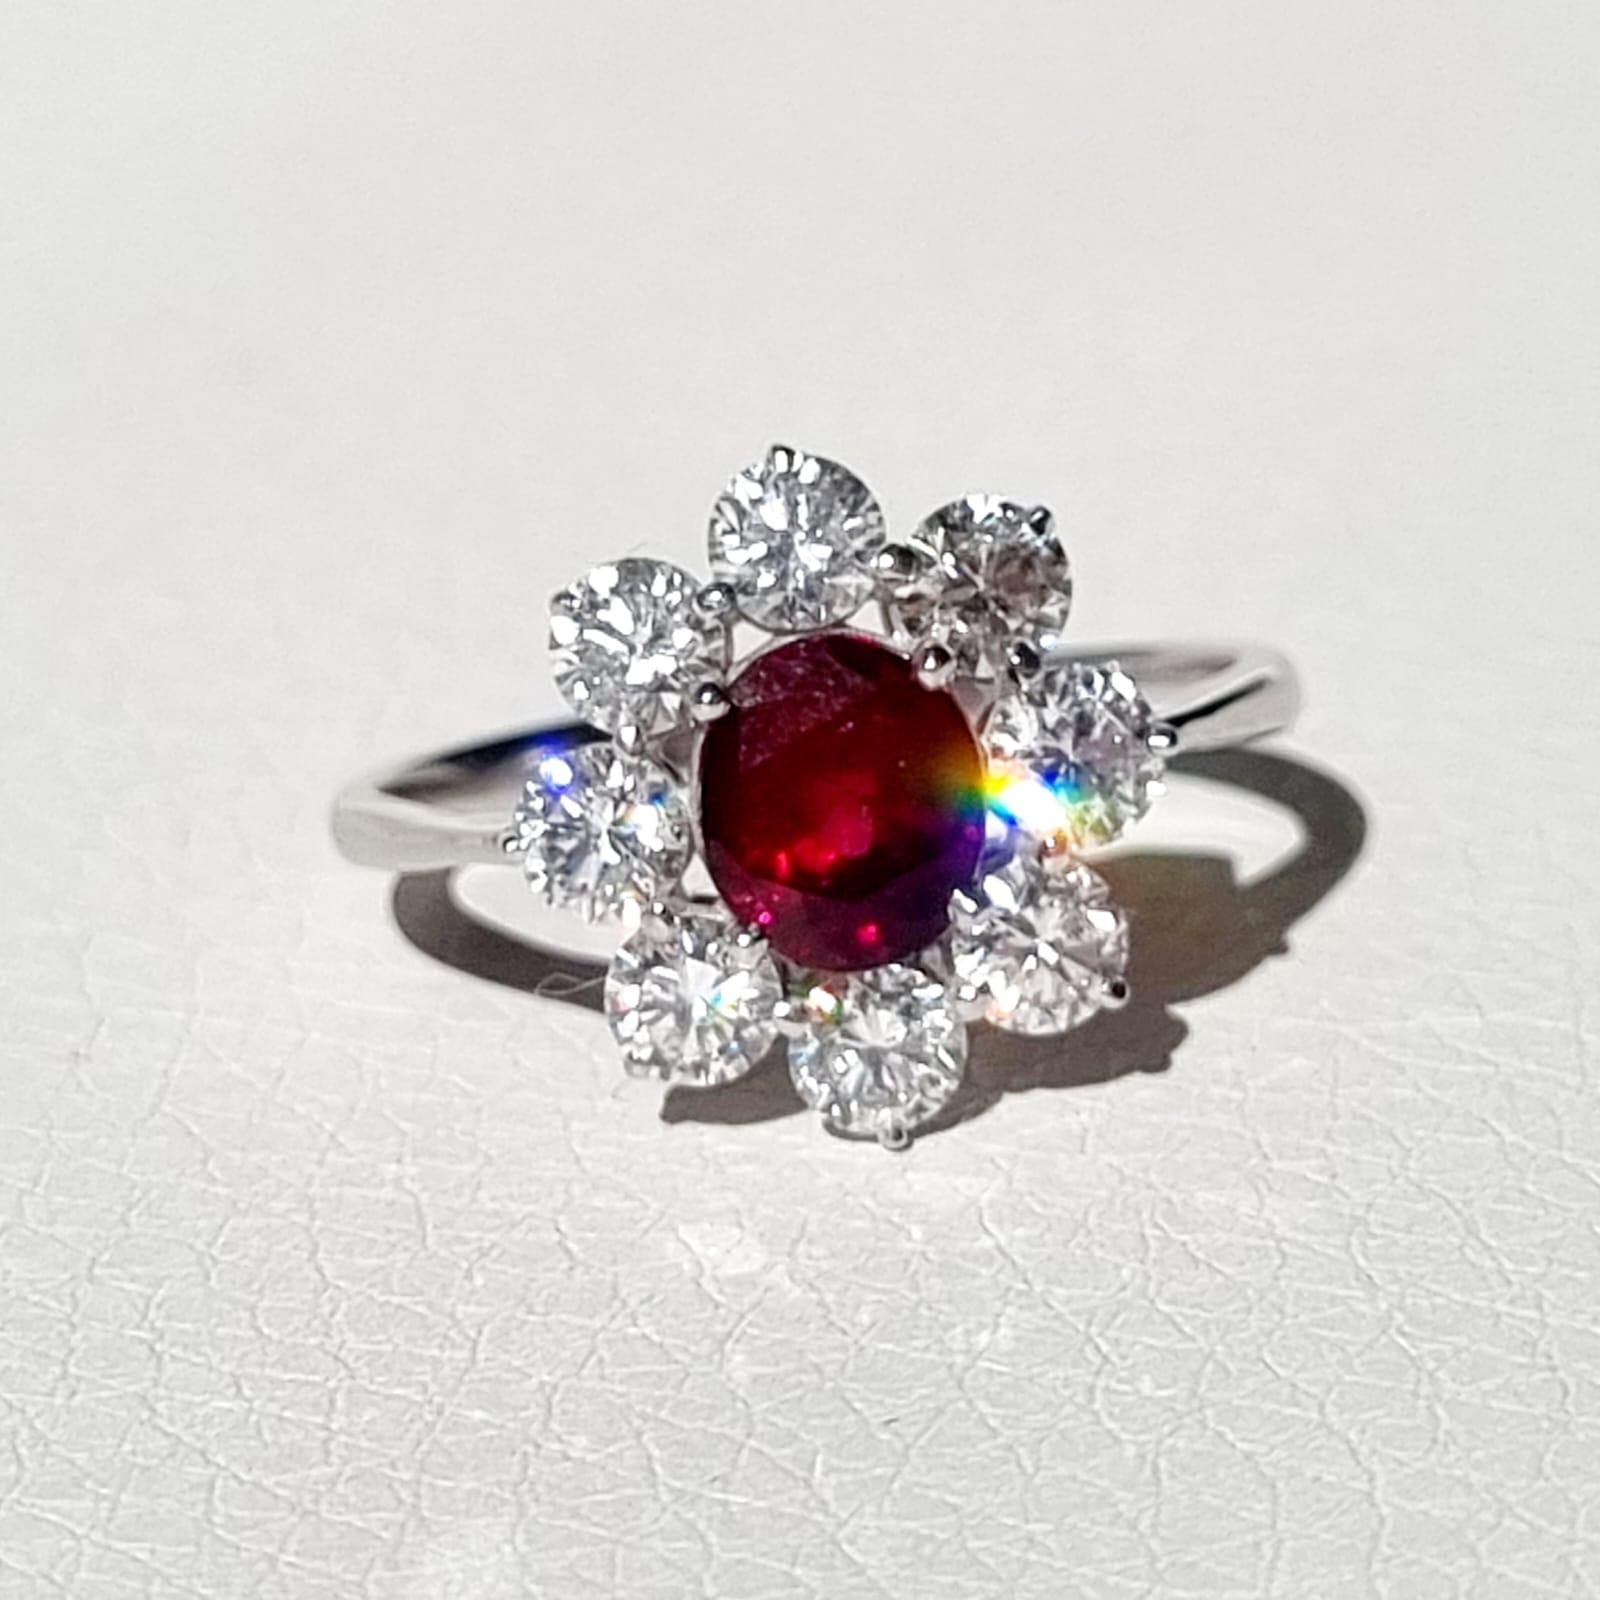 Material: 18k solid white gold
Ring is available in size 55/O/7.5 but can be resized. Resizing is complementary, please contact us to inform us on the right size.

Main Stone Type: Natural Burmese Ruby, oval mix cut
Weight: 1.45 ct
Color: Red,